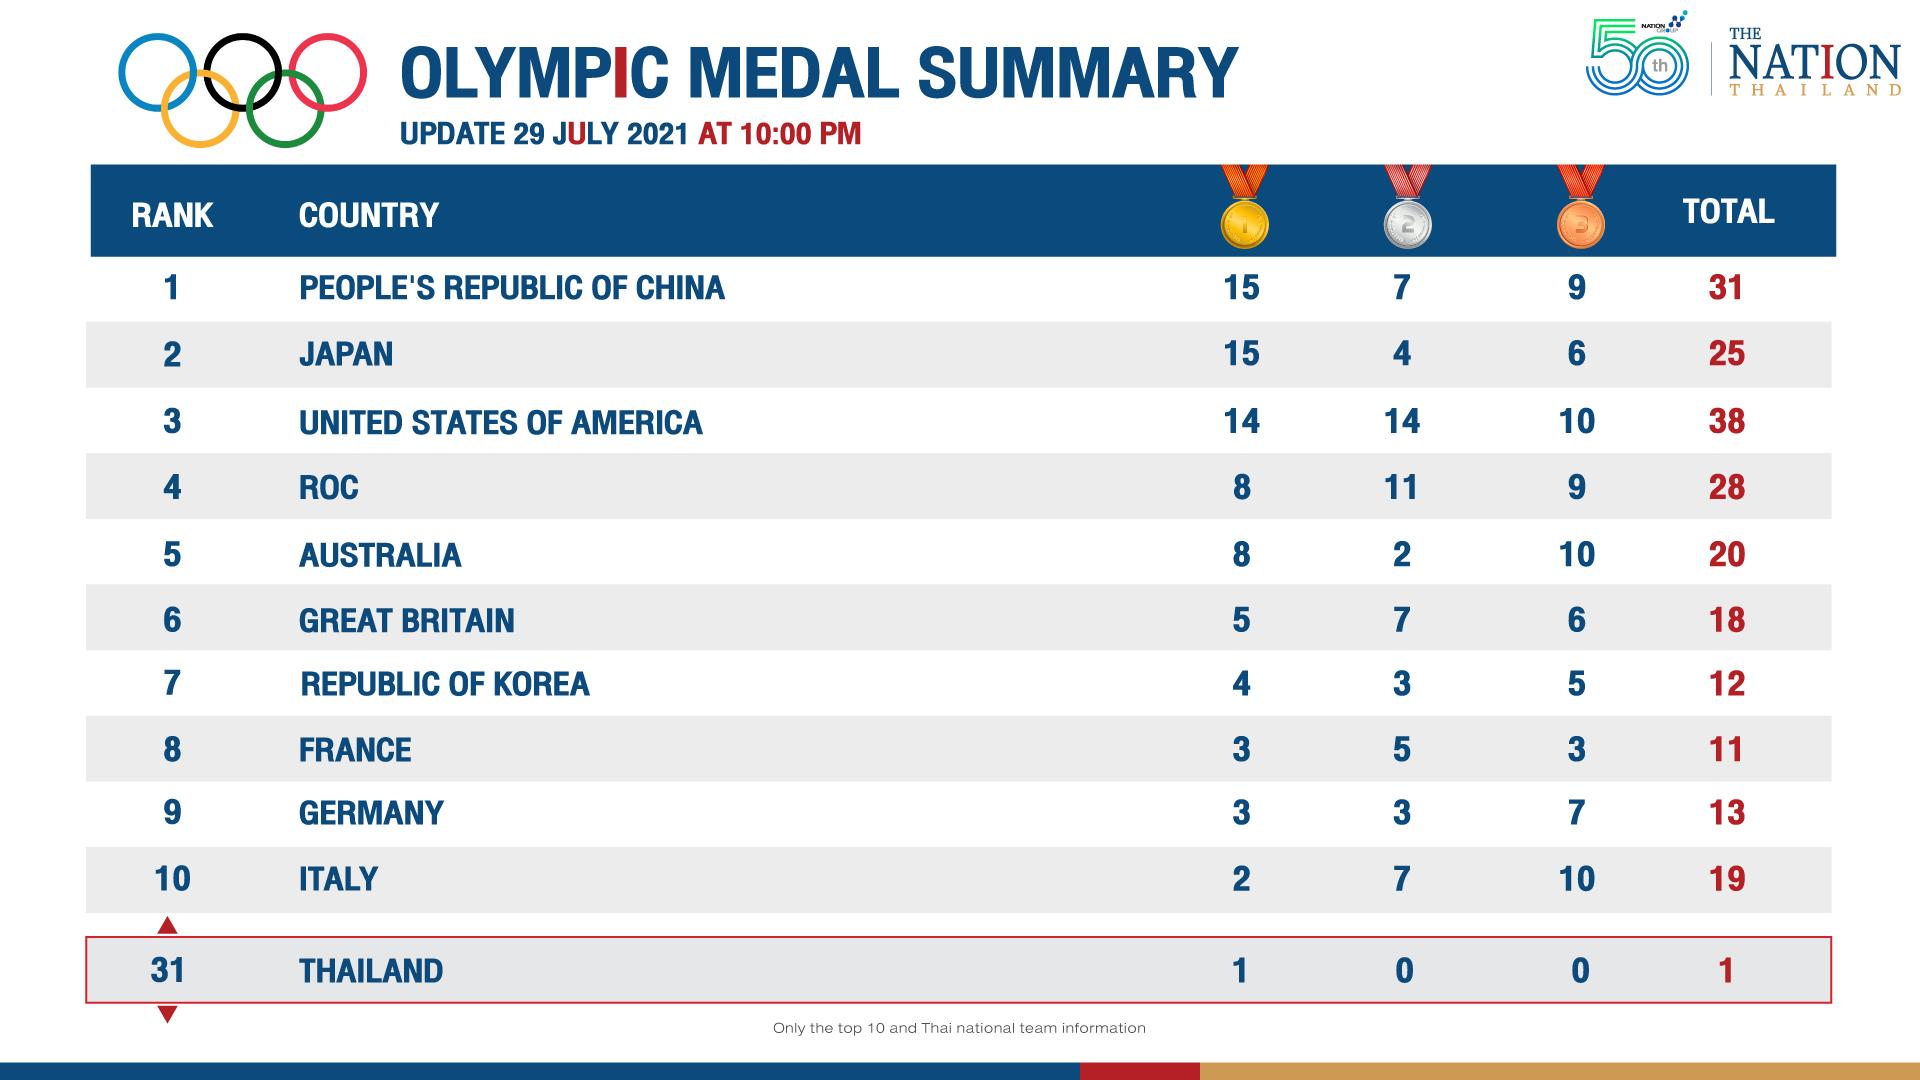 Thailand slips to 31st on Olympics medals table